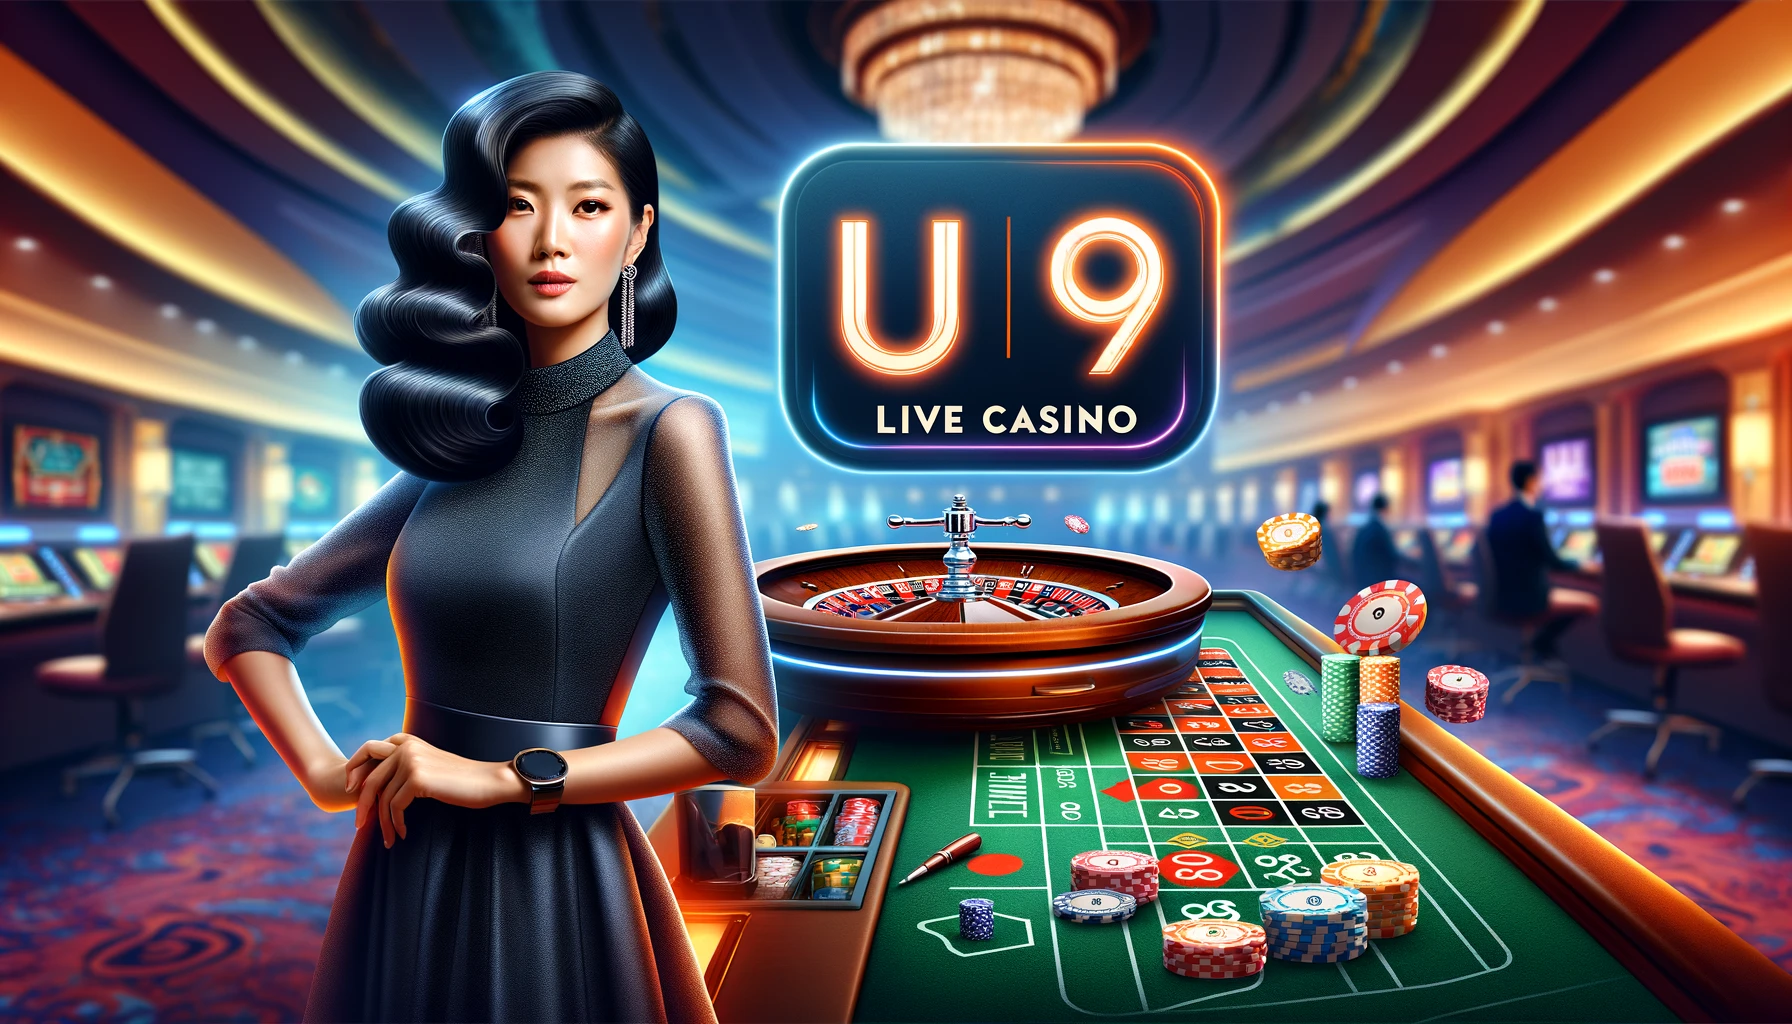 Experience Premier Gaming at U9 Live Casino: Your Ultimate Destination